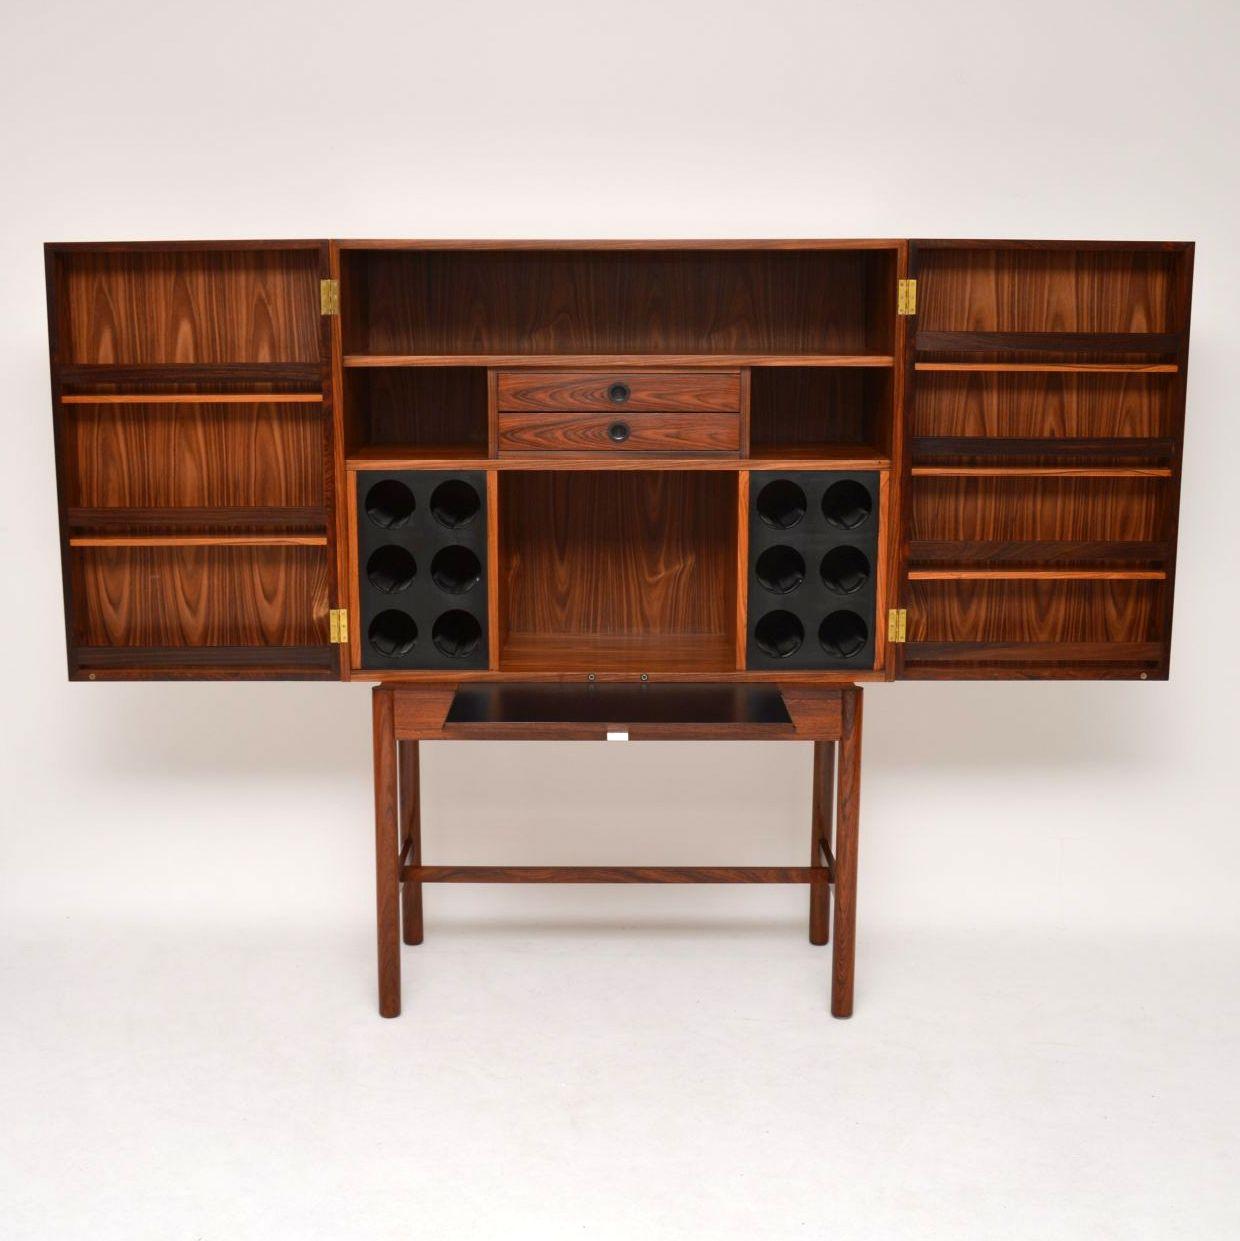 A large, impressive and extremely beautiful drinks cabinet, this was designed by Robert Heritage and made by Archie Shine in the 1960s. The quality is absolutely superb, this has stunning wood grain patterns throughout, even on the inside. The